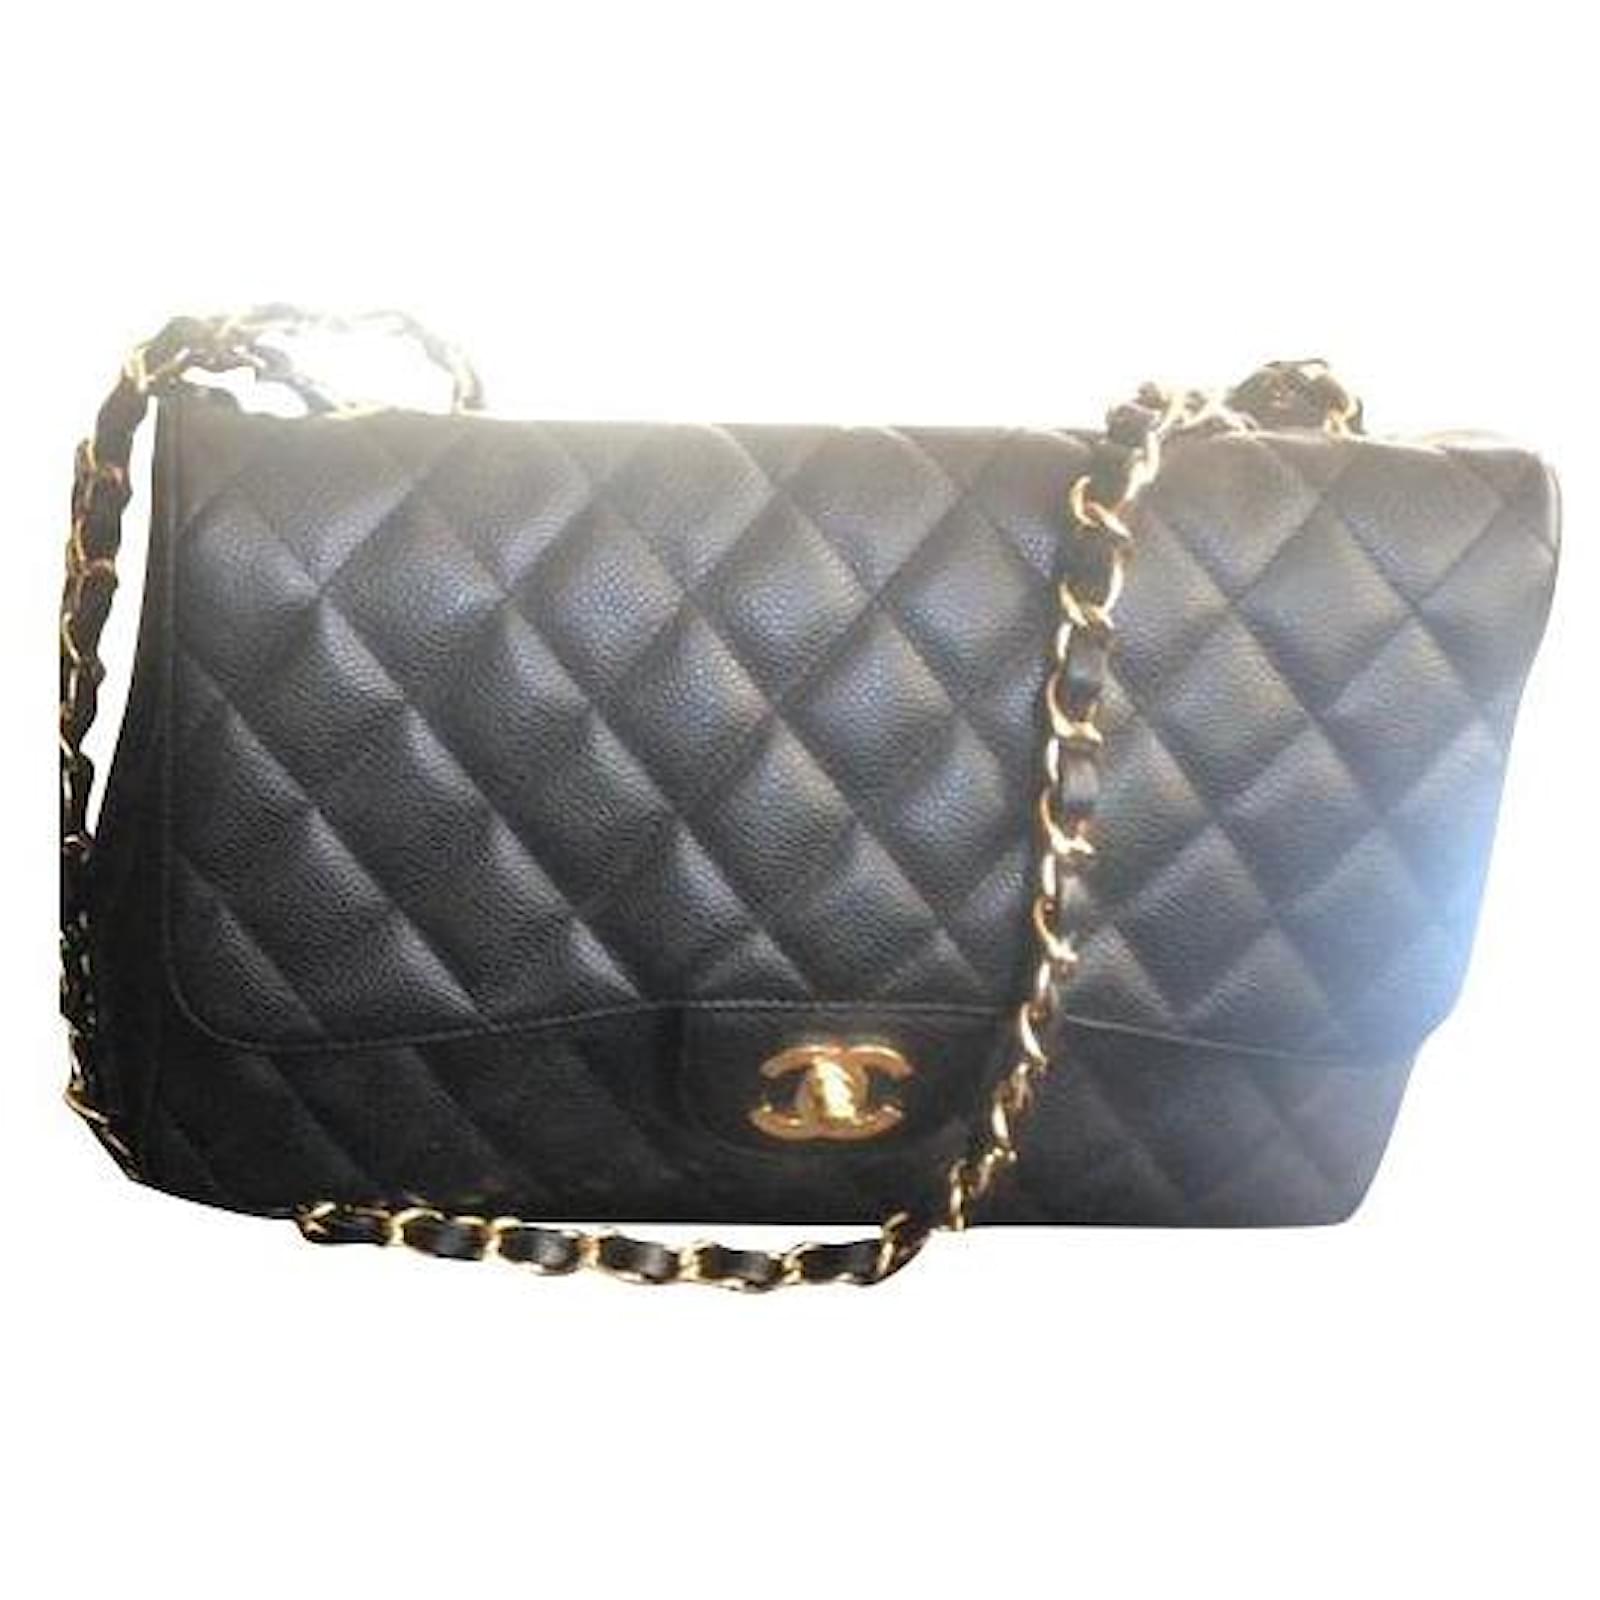 Chanel JUMBO Black Quilted CAVIAR Leather Timeless Classic Single